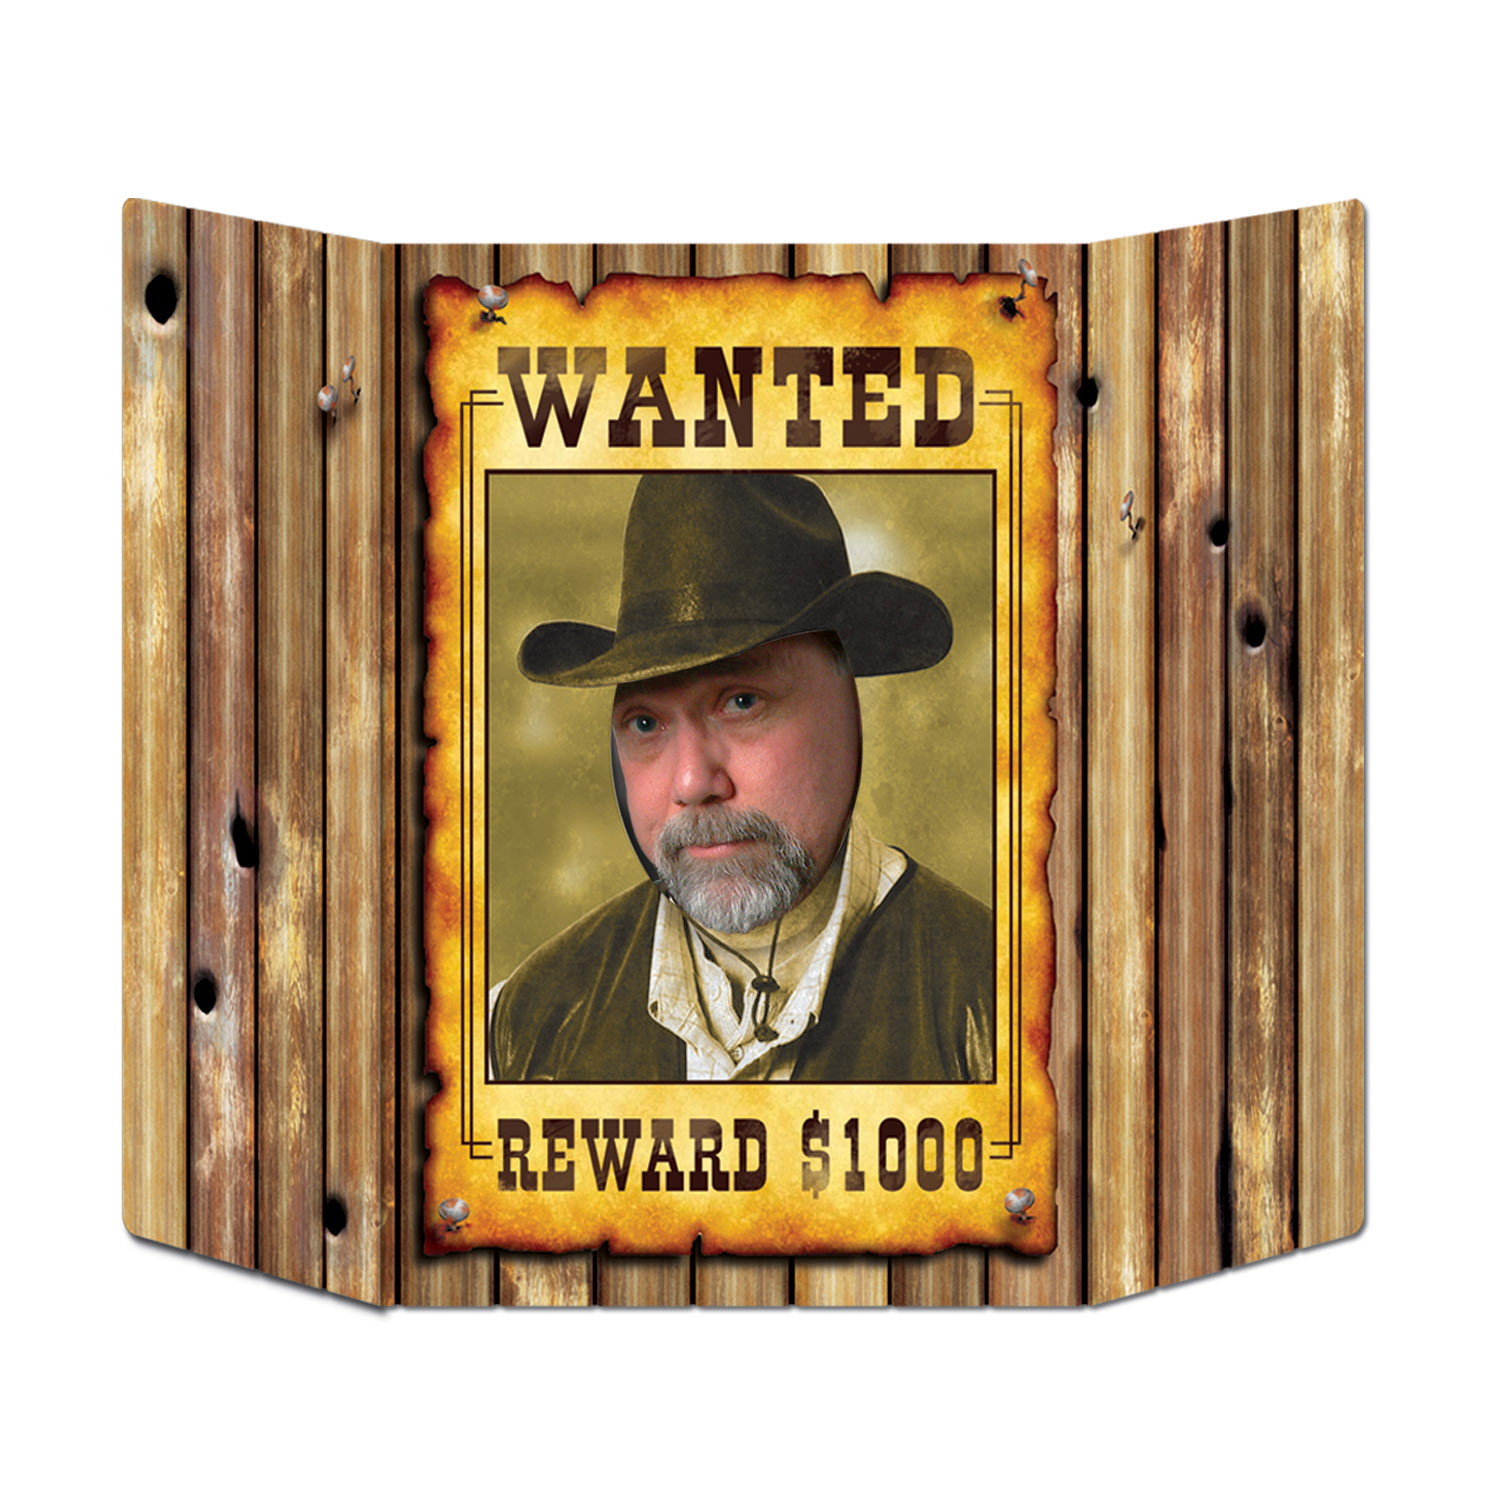 Wanted Poster Photo Prop